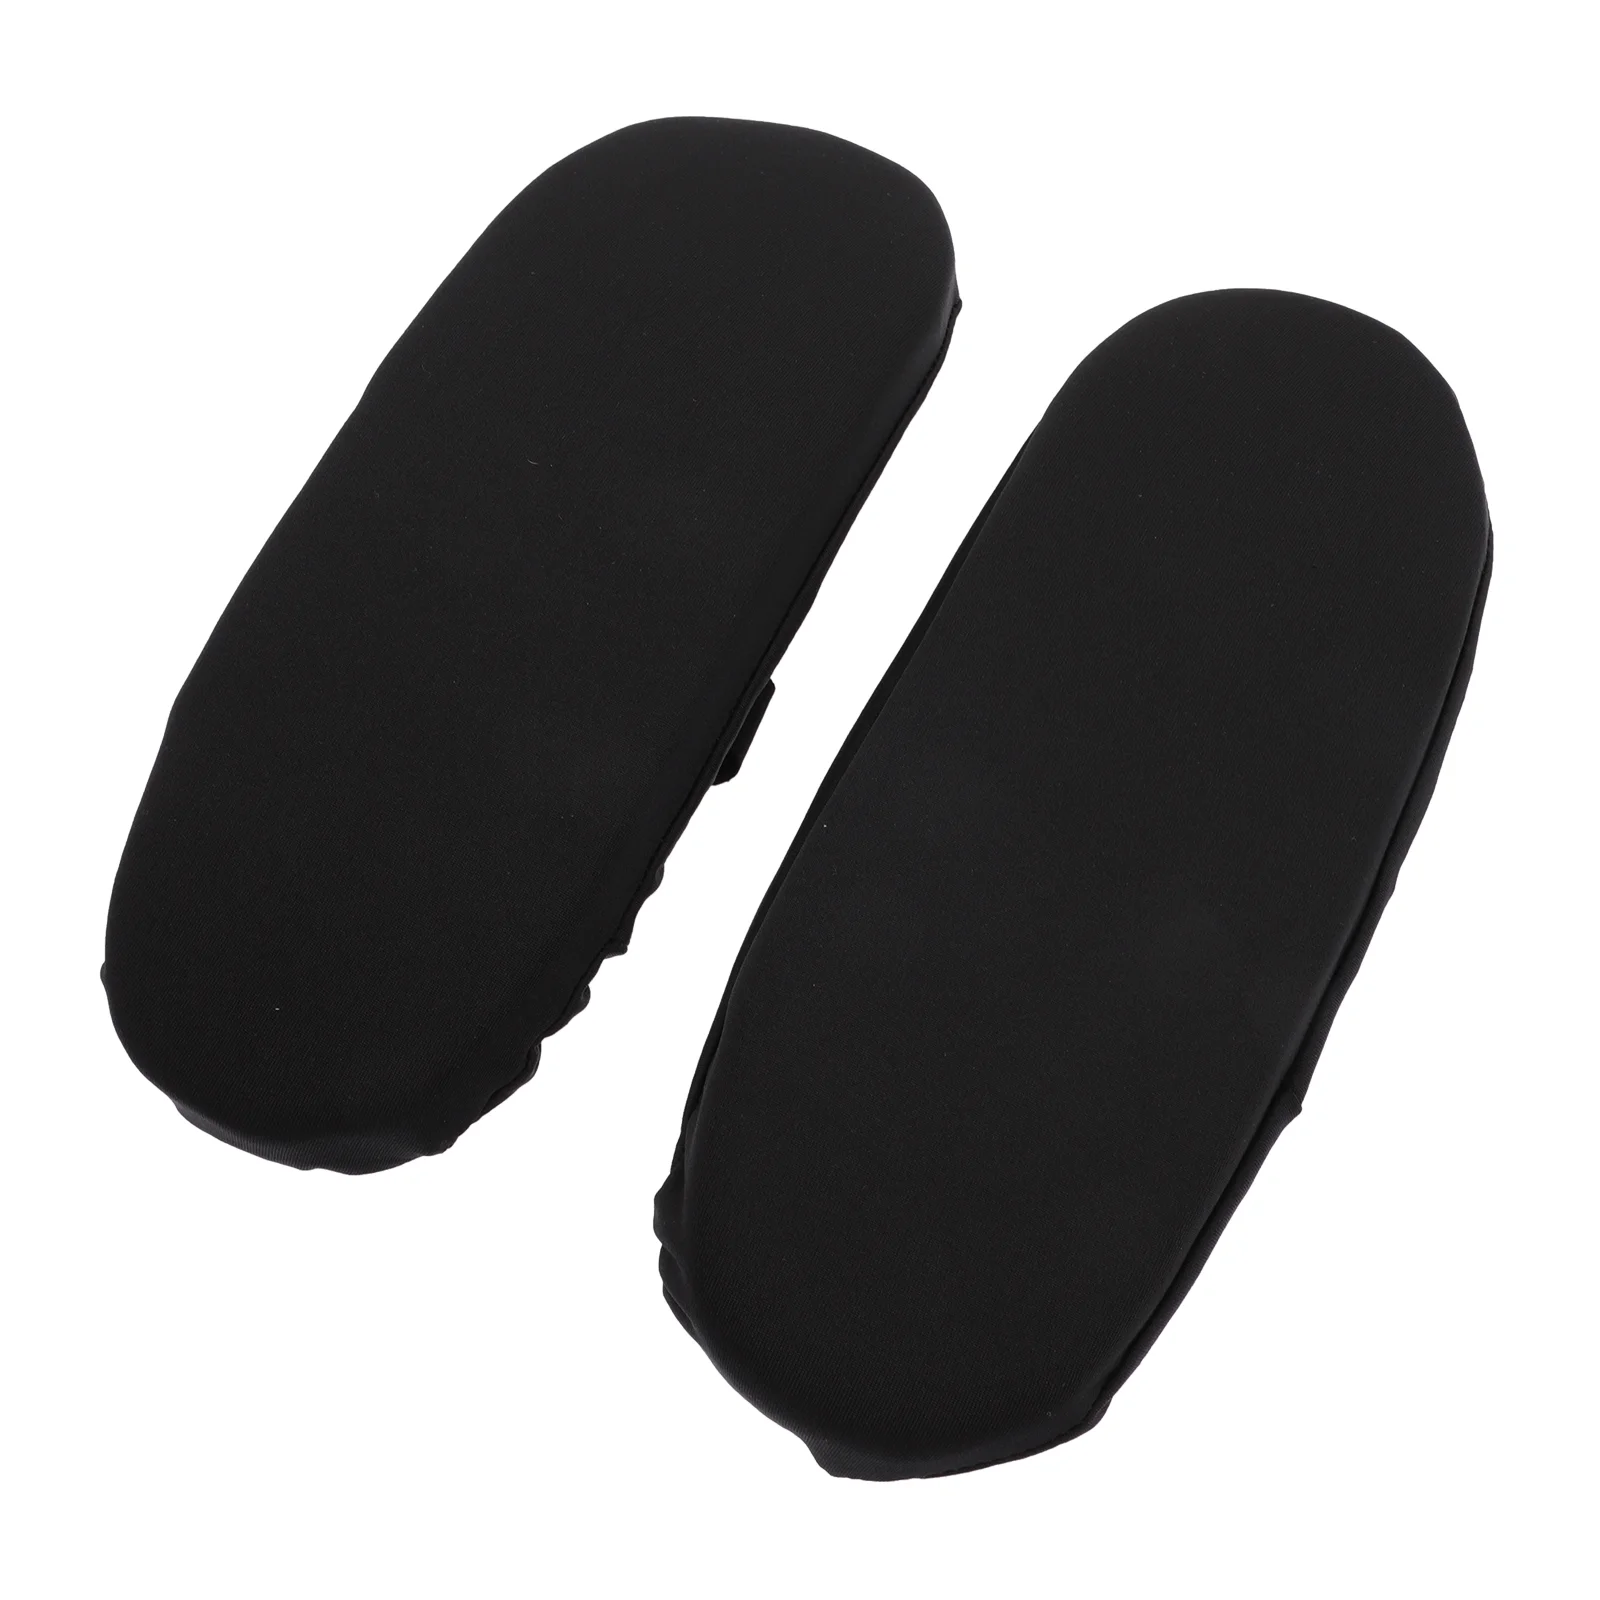 

Office Chair Arm Rest Pad: Ergonomic Chair Armrest Cushion Gaming Computer Chair Memory Elbow Rest Pad 2pcs 28x9cm